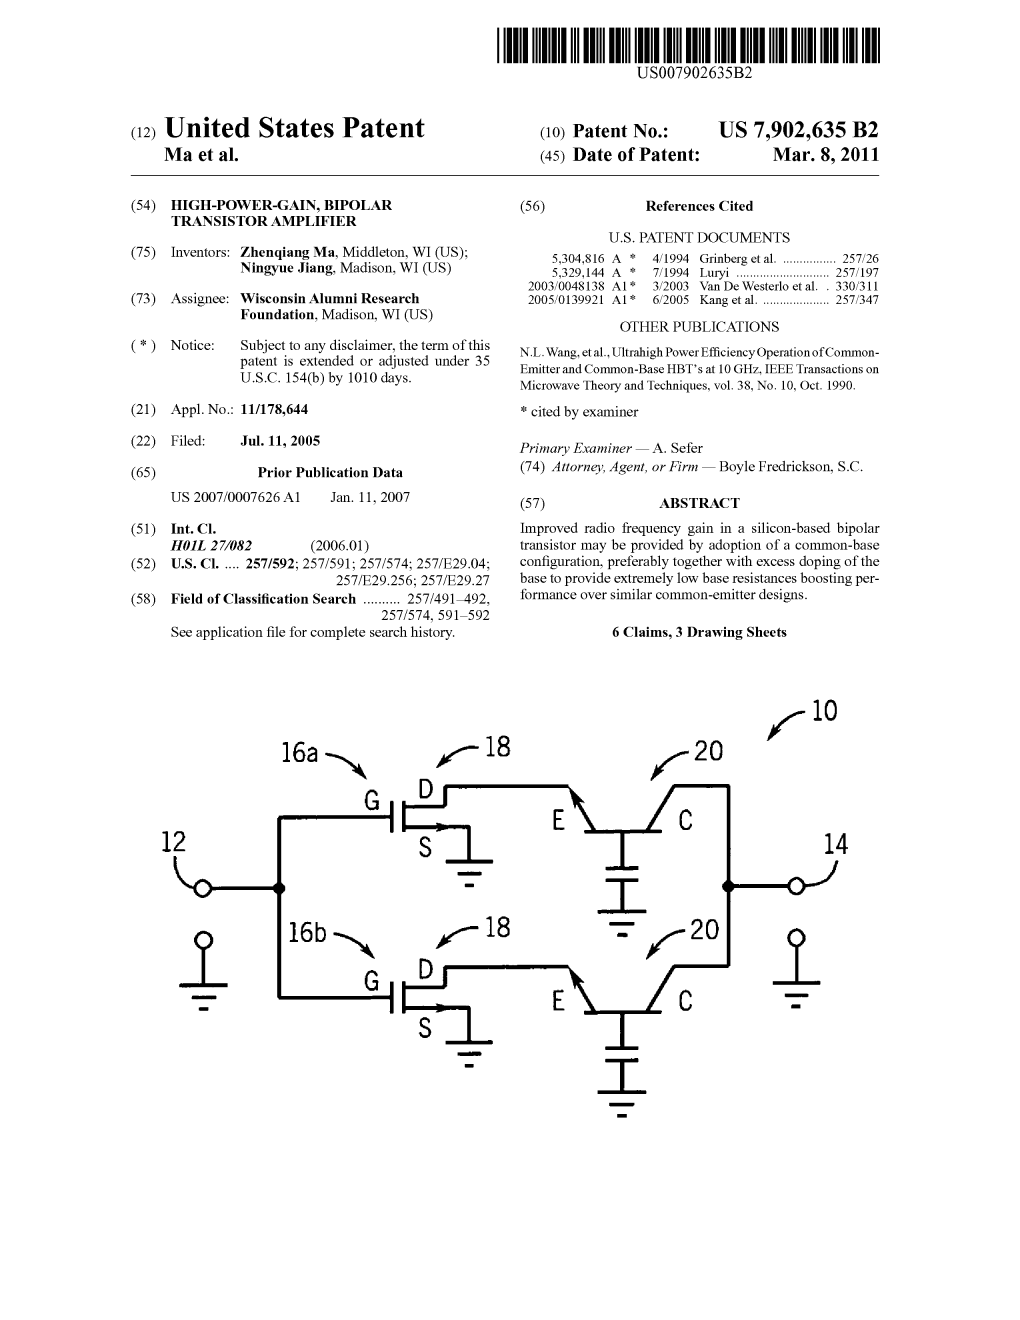 View U.S. Patent No. 7902635 in PDF Format